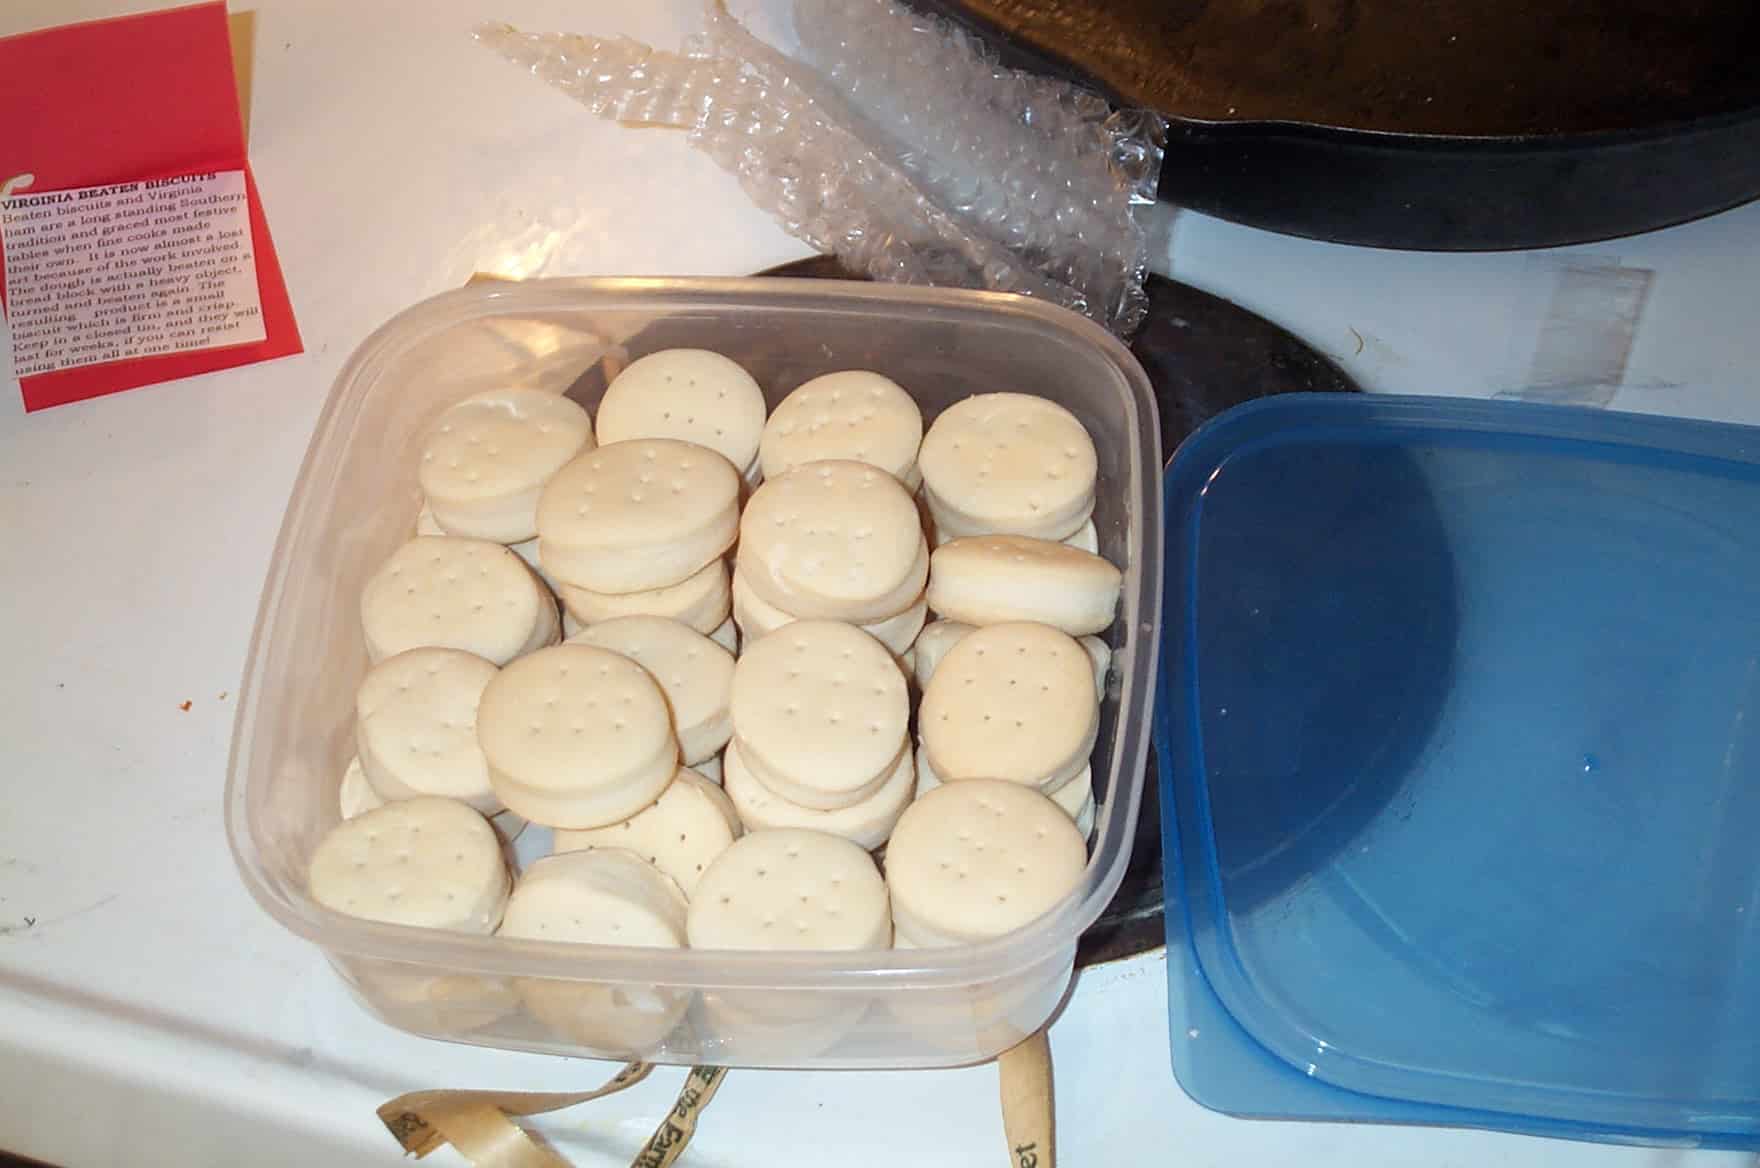 Beaten biscuits in a plastic container.